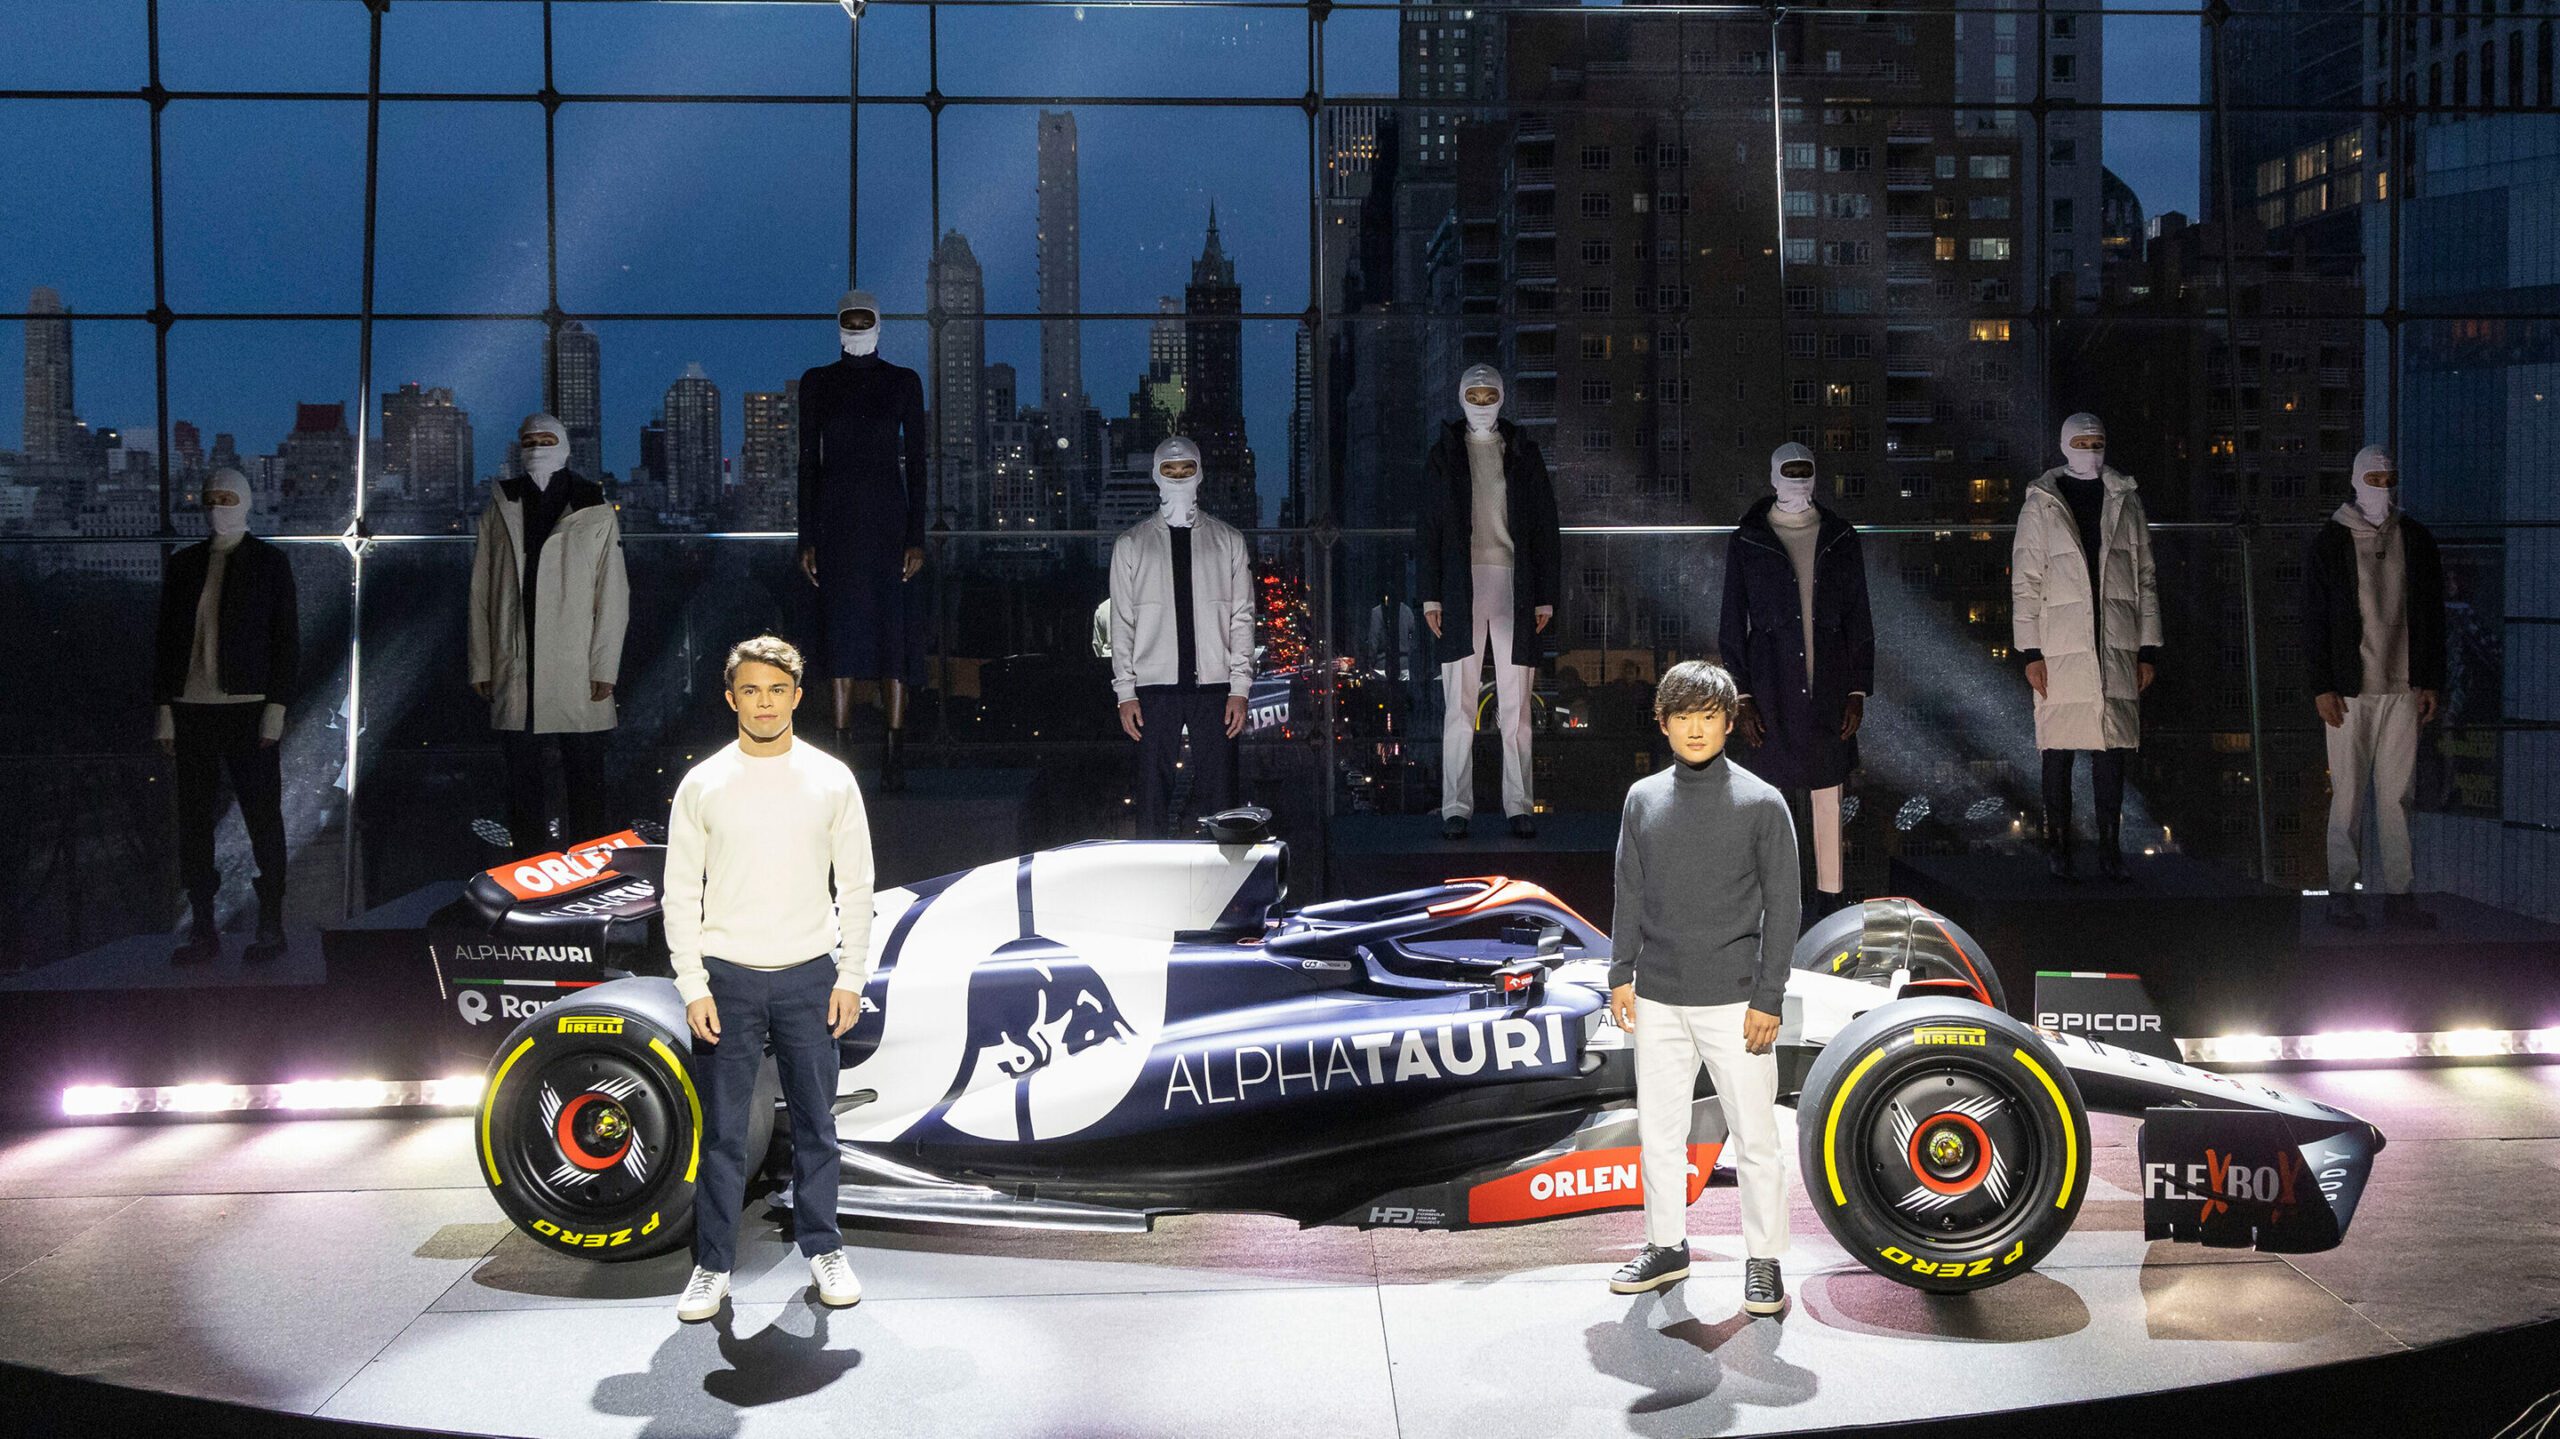 Scuderia AlphaTauri Formula One drivers Nyck De Vries and Yuki Tsunoda in front of the 2023 car during the Scuderia AlphaTauri Season Launch at Lincoln Center in New York, NY on 11 February, 2023 (Photo by Colin Kerrigan)